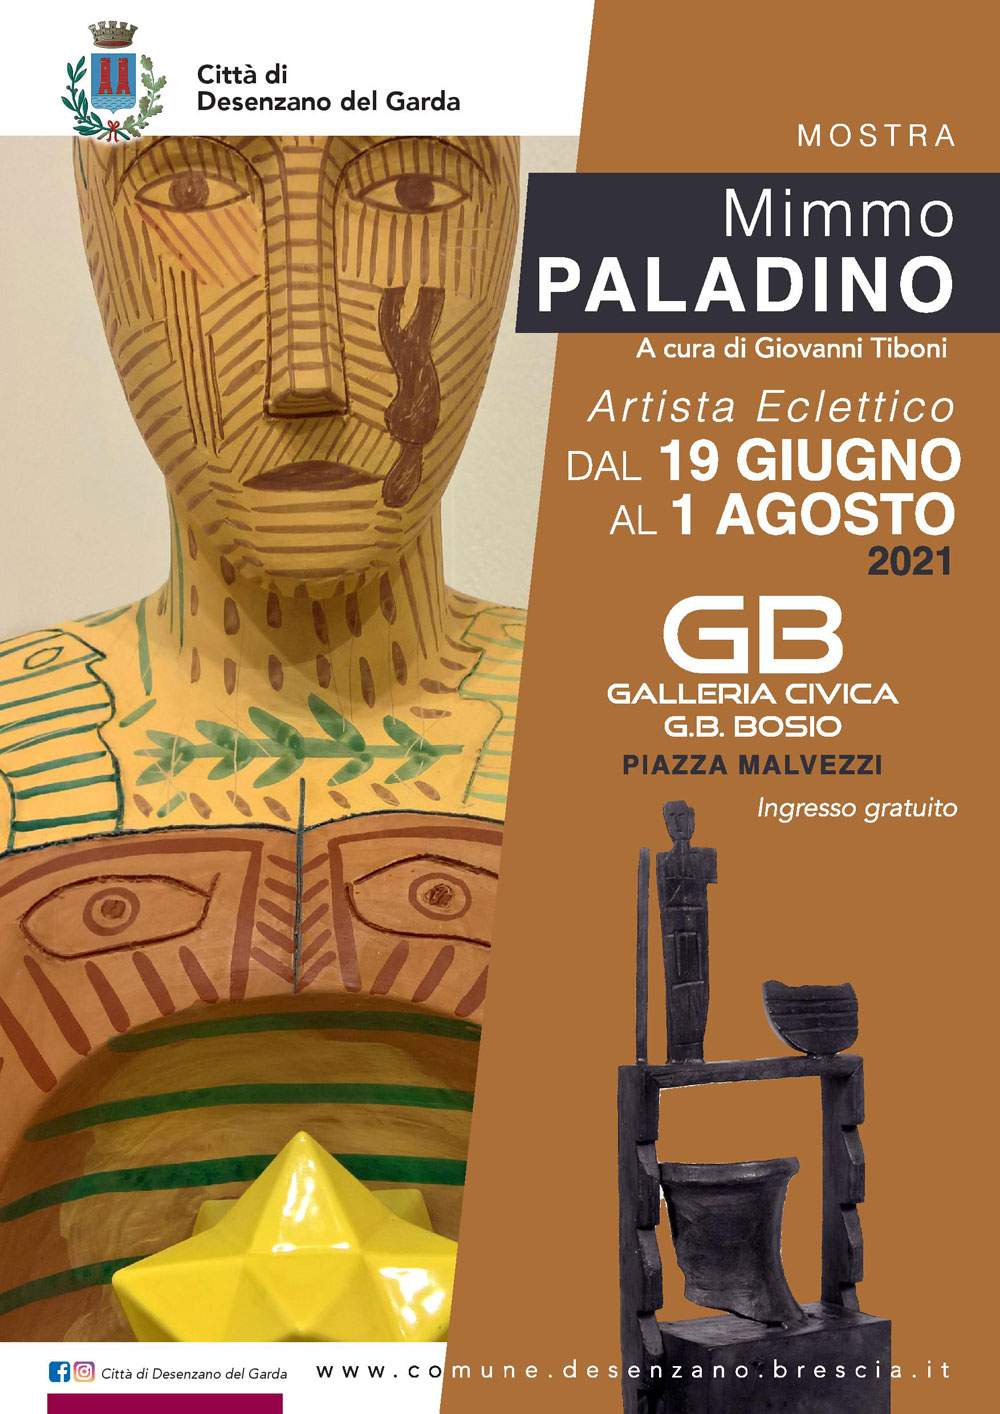 Mimmo Paladino's eclecticism on display at the Desenzano Civic Gallery 